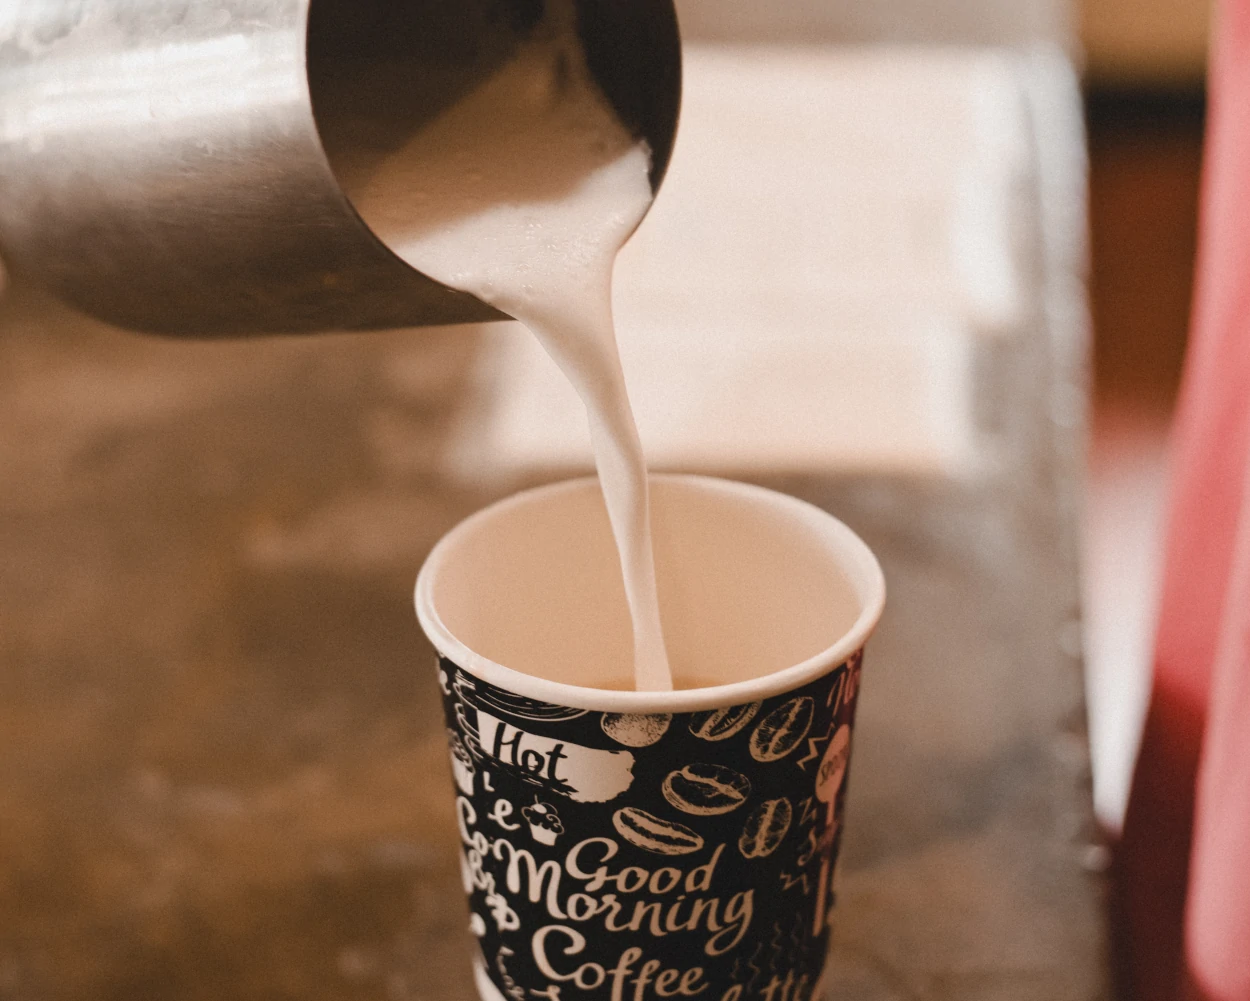 Frothed milk being poured into a cup